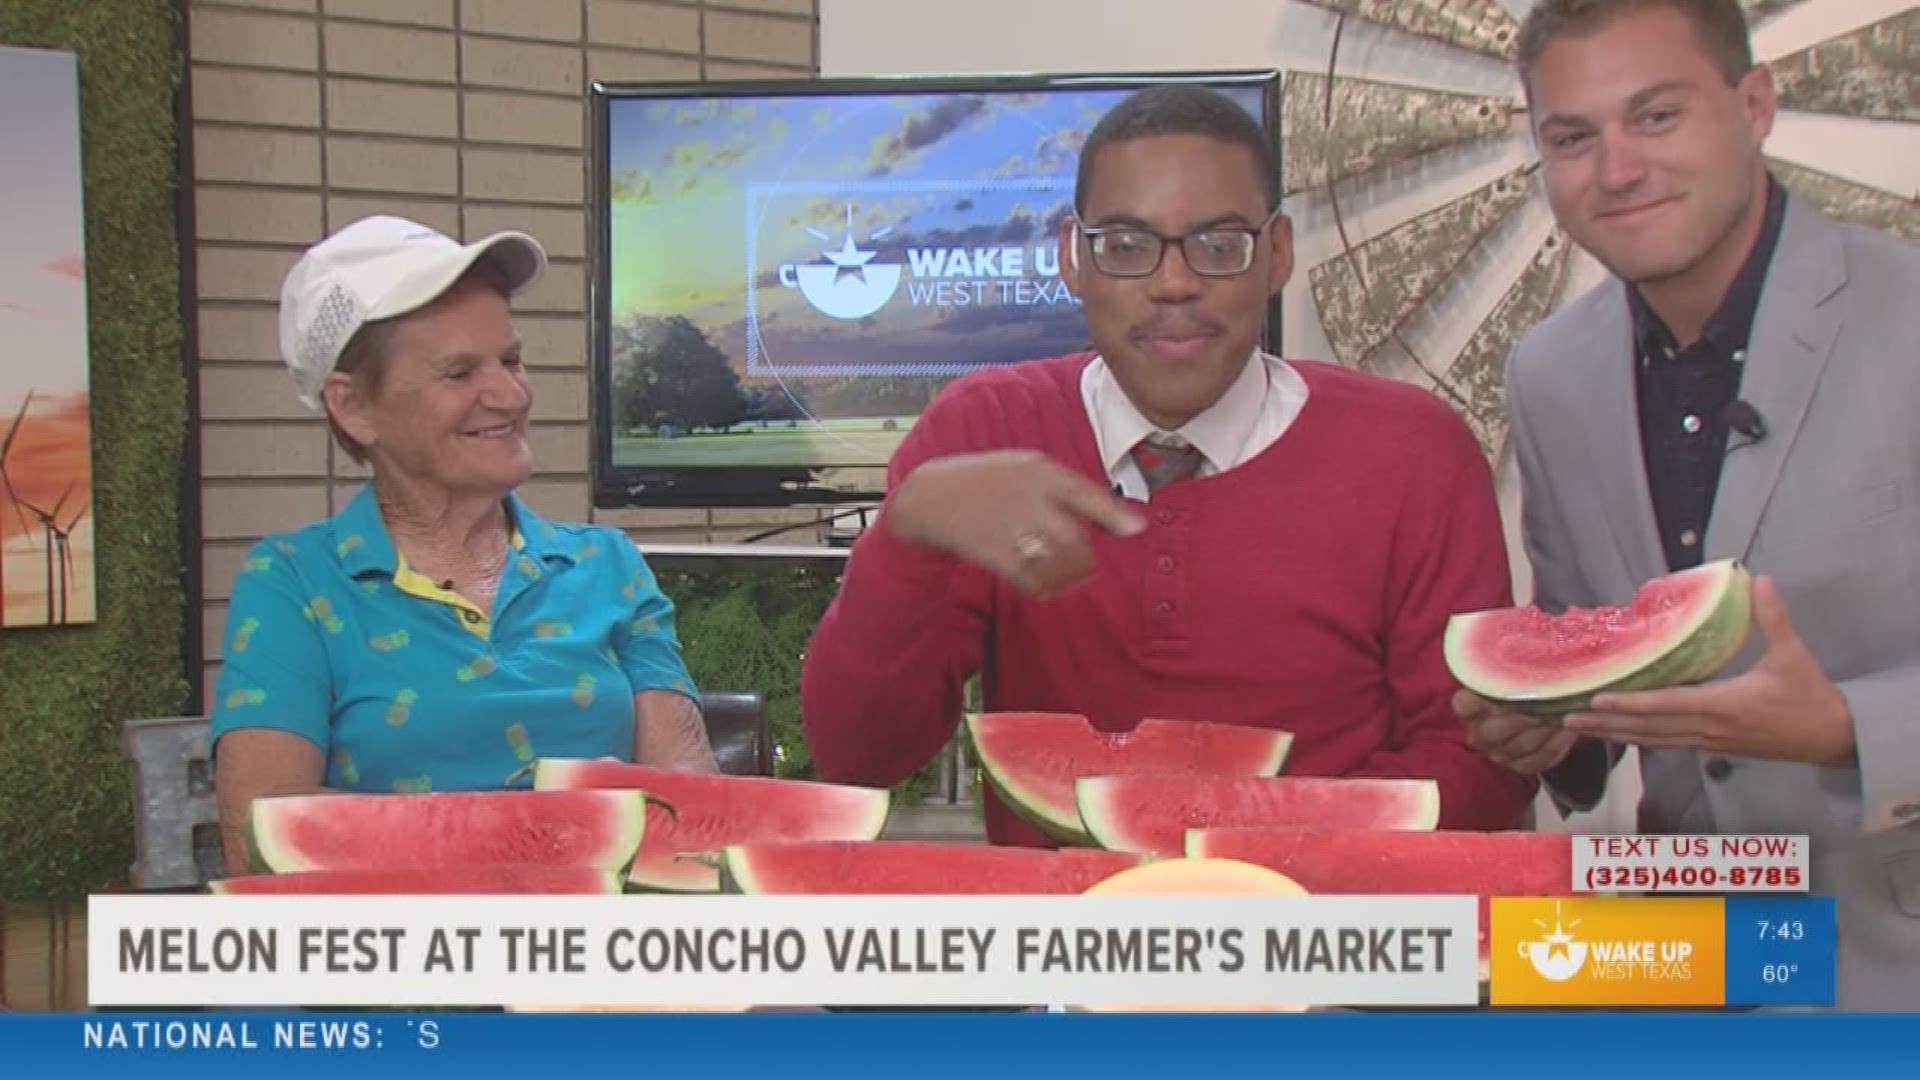 With the Melon Fest this weekend at the Concho Valley Farmer's Market, our WUWT crew tastes some watermelon live on the show